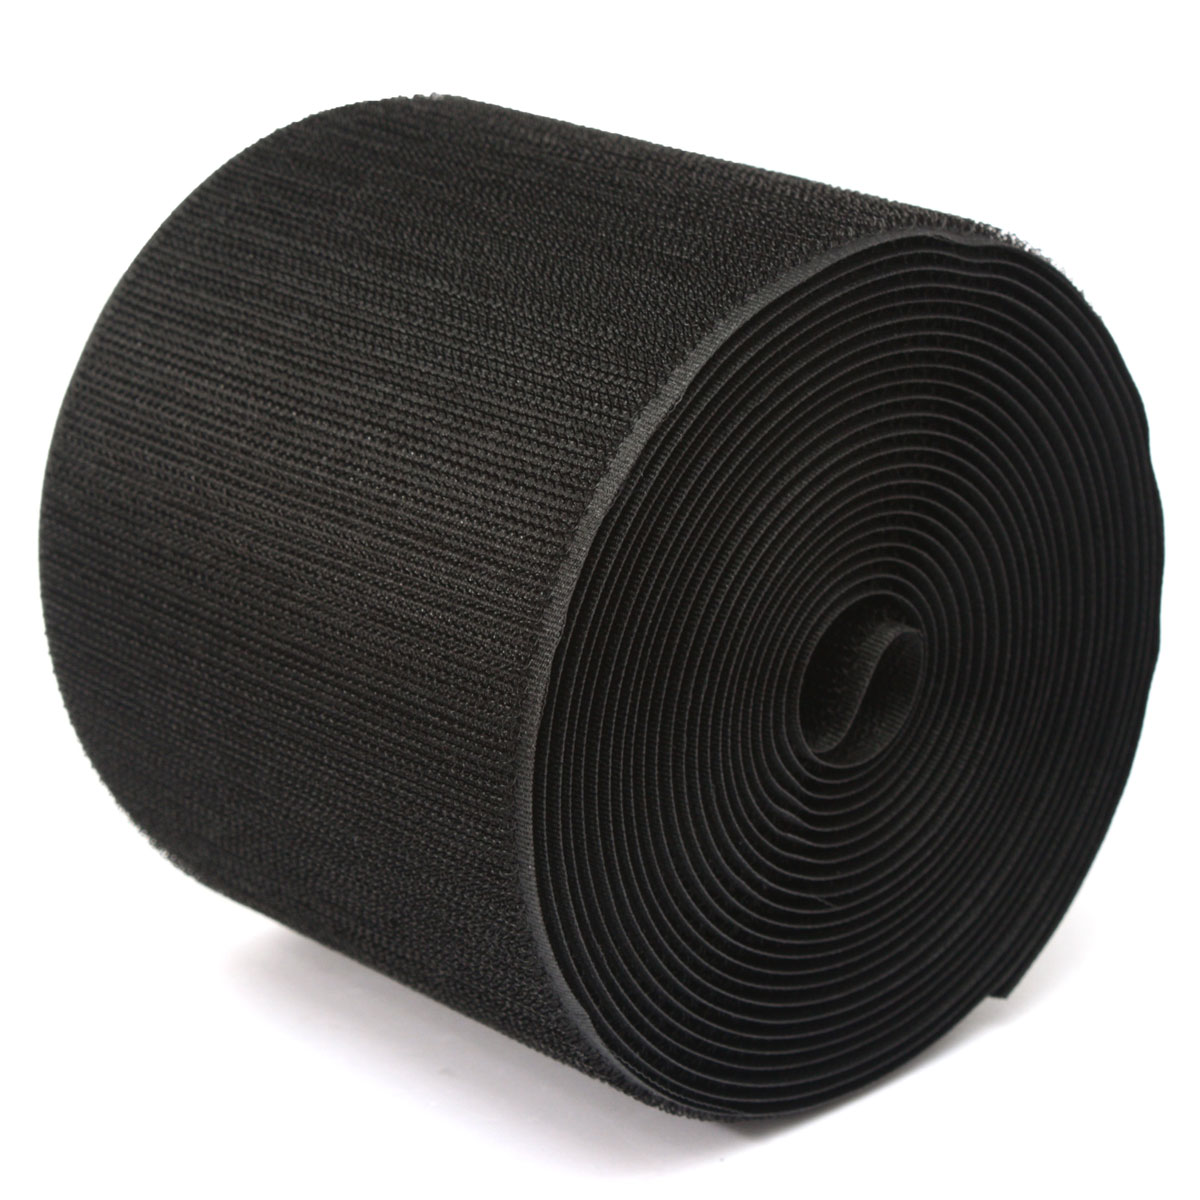 Find 5m Black Nylon Cable Cover For Carpet for Sale on Gipsybee.com with cryptocurrencies